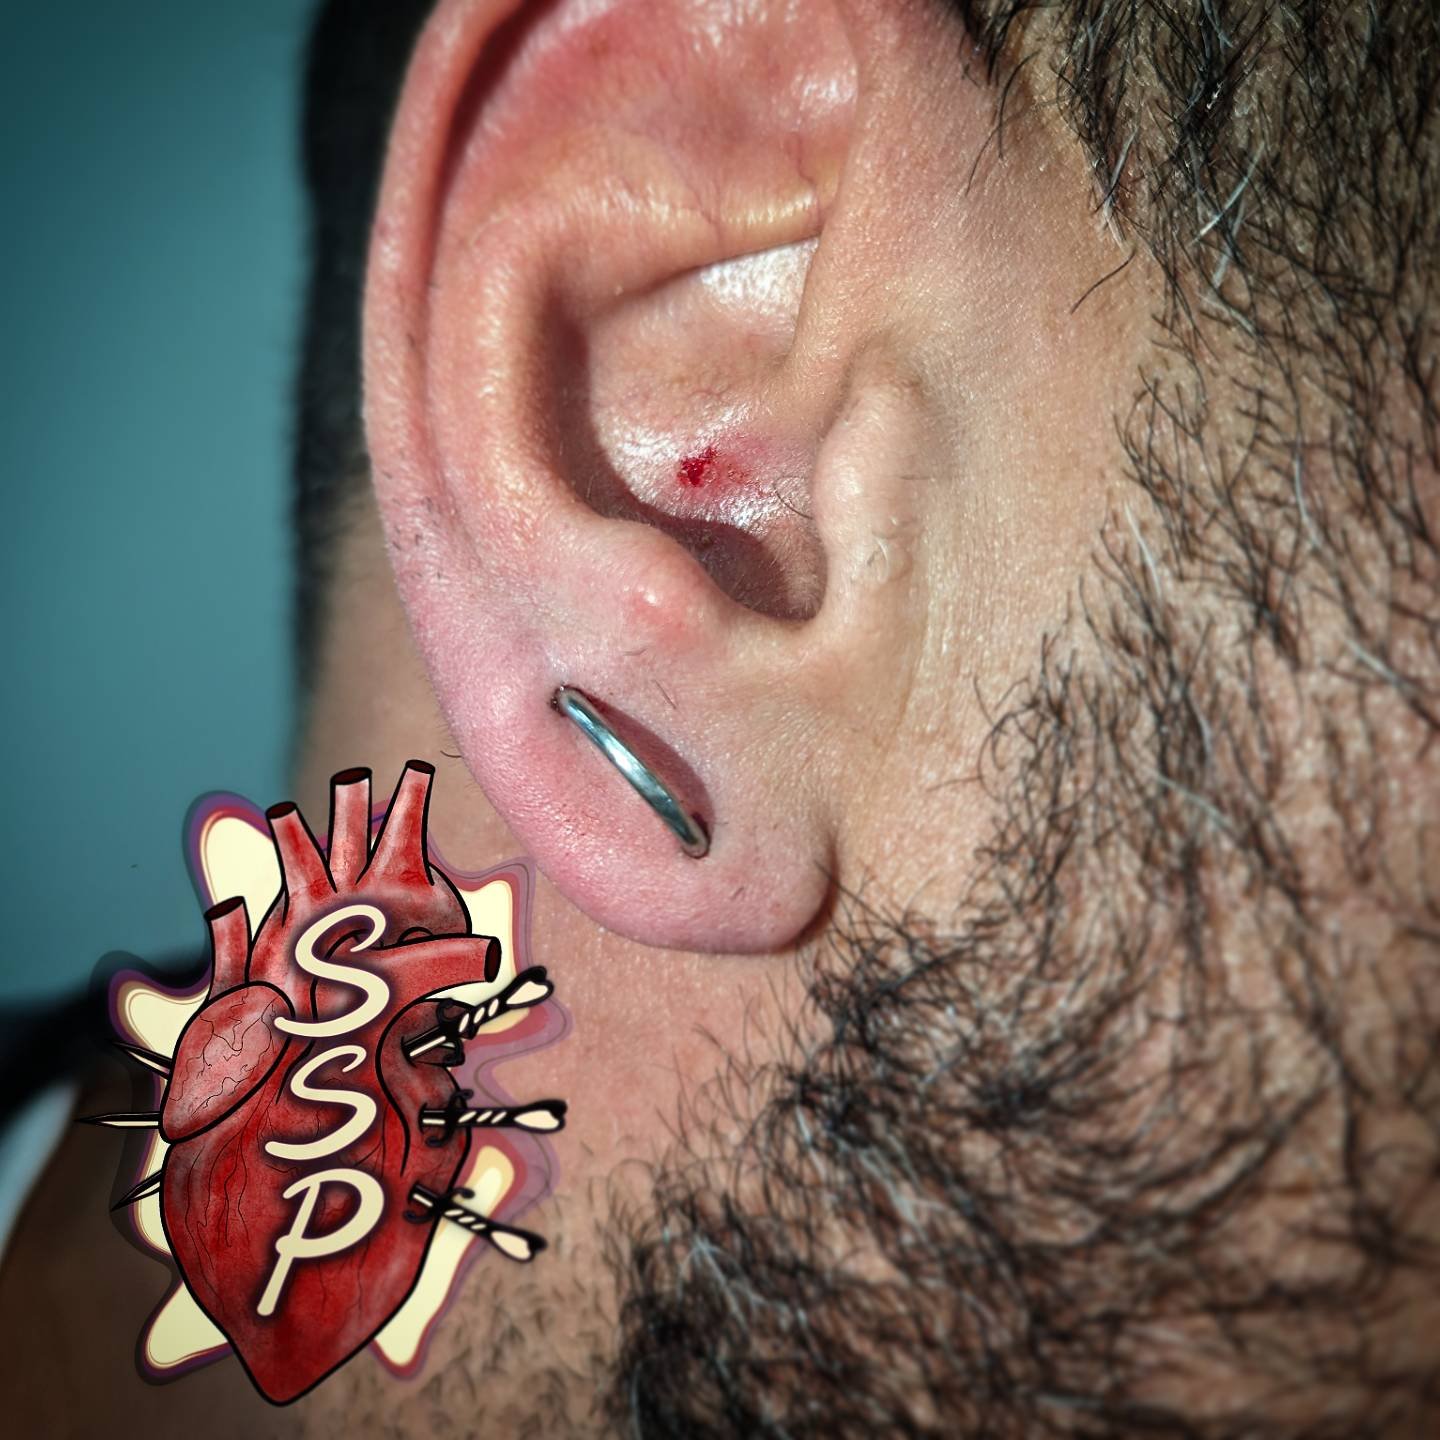 Such a badass idea for this guy's first piercing. Double Orbital Lobe Piercing.

If you're interested in coming in for a piercing. There is no appointment needed, you can just come into the shop while we are open. Any questions about piercings you ca